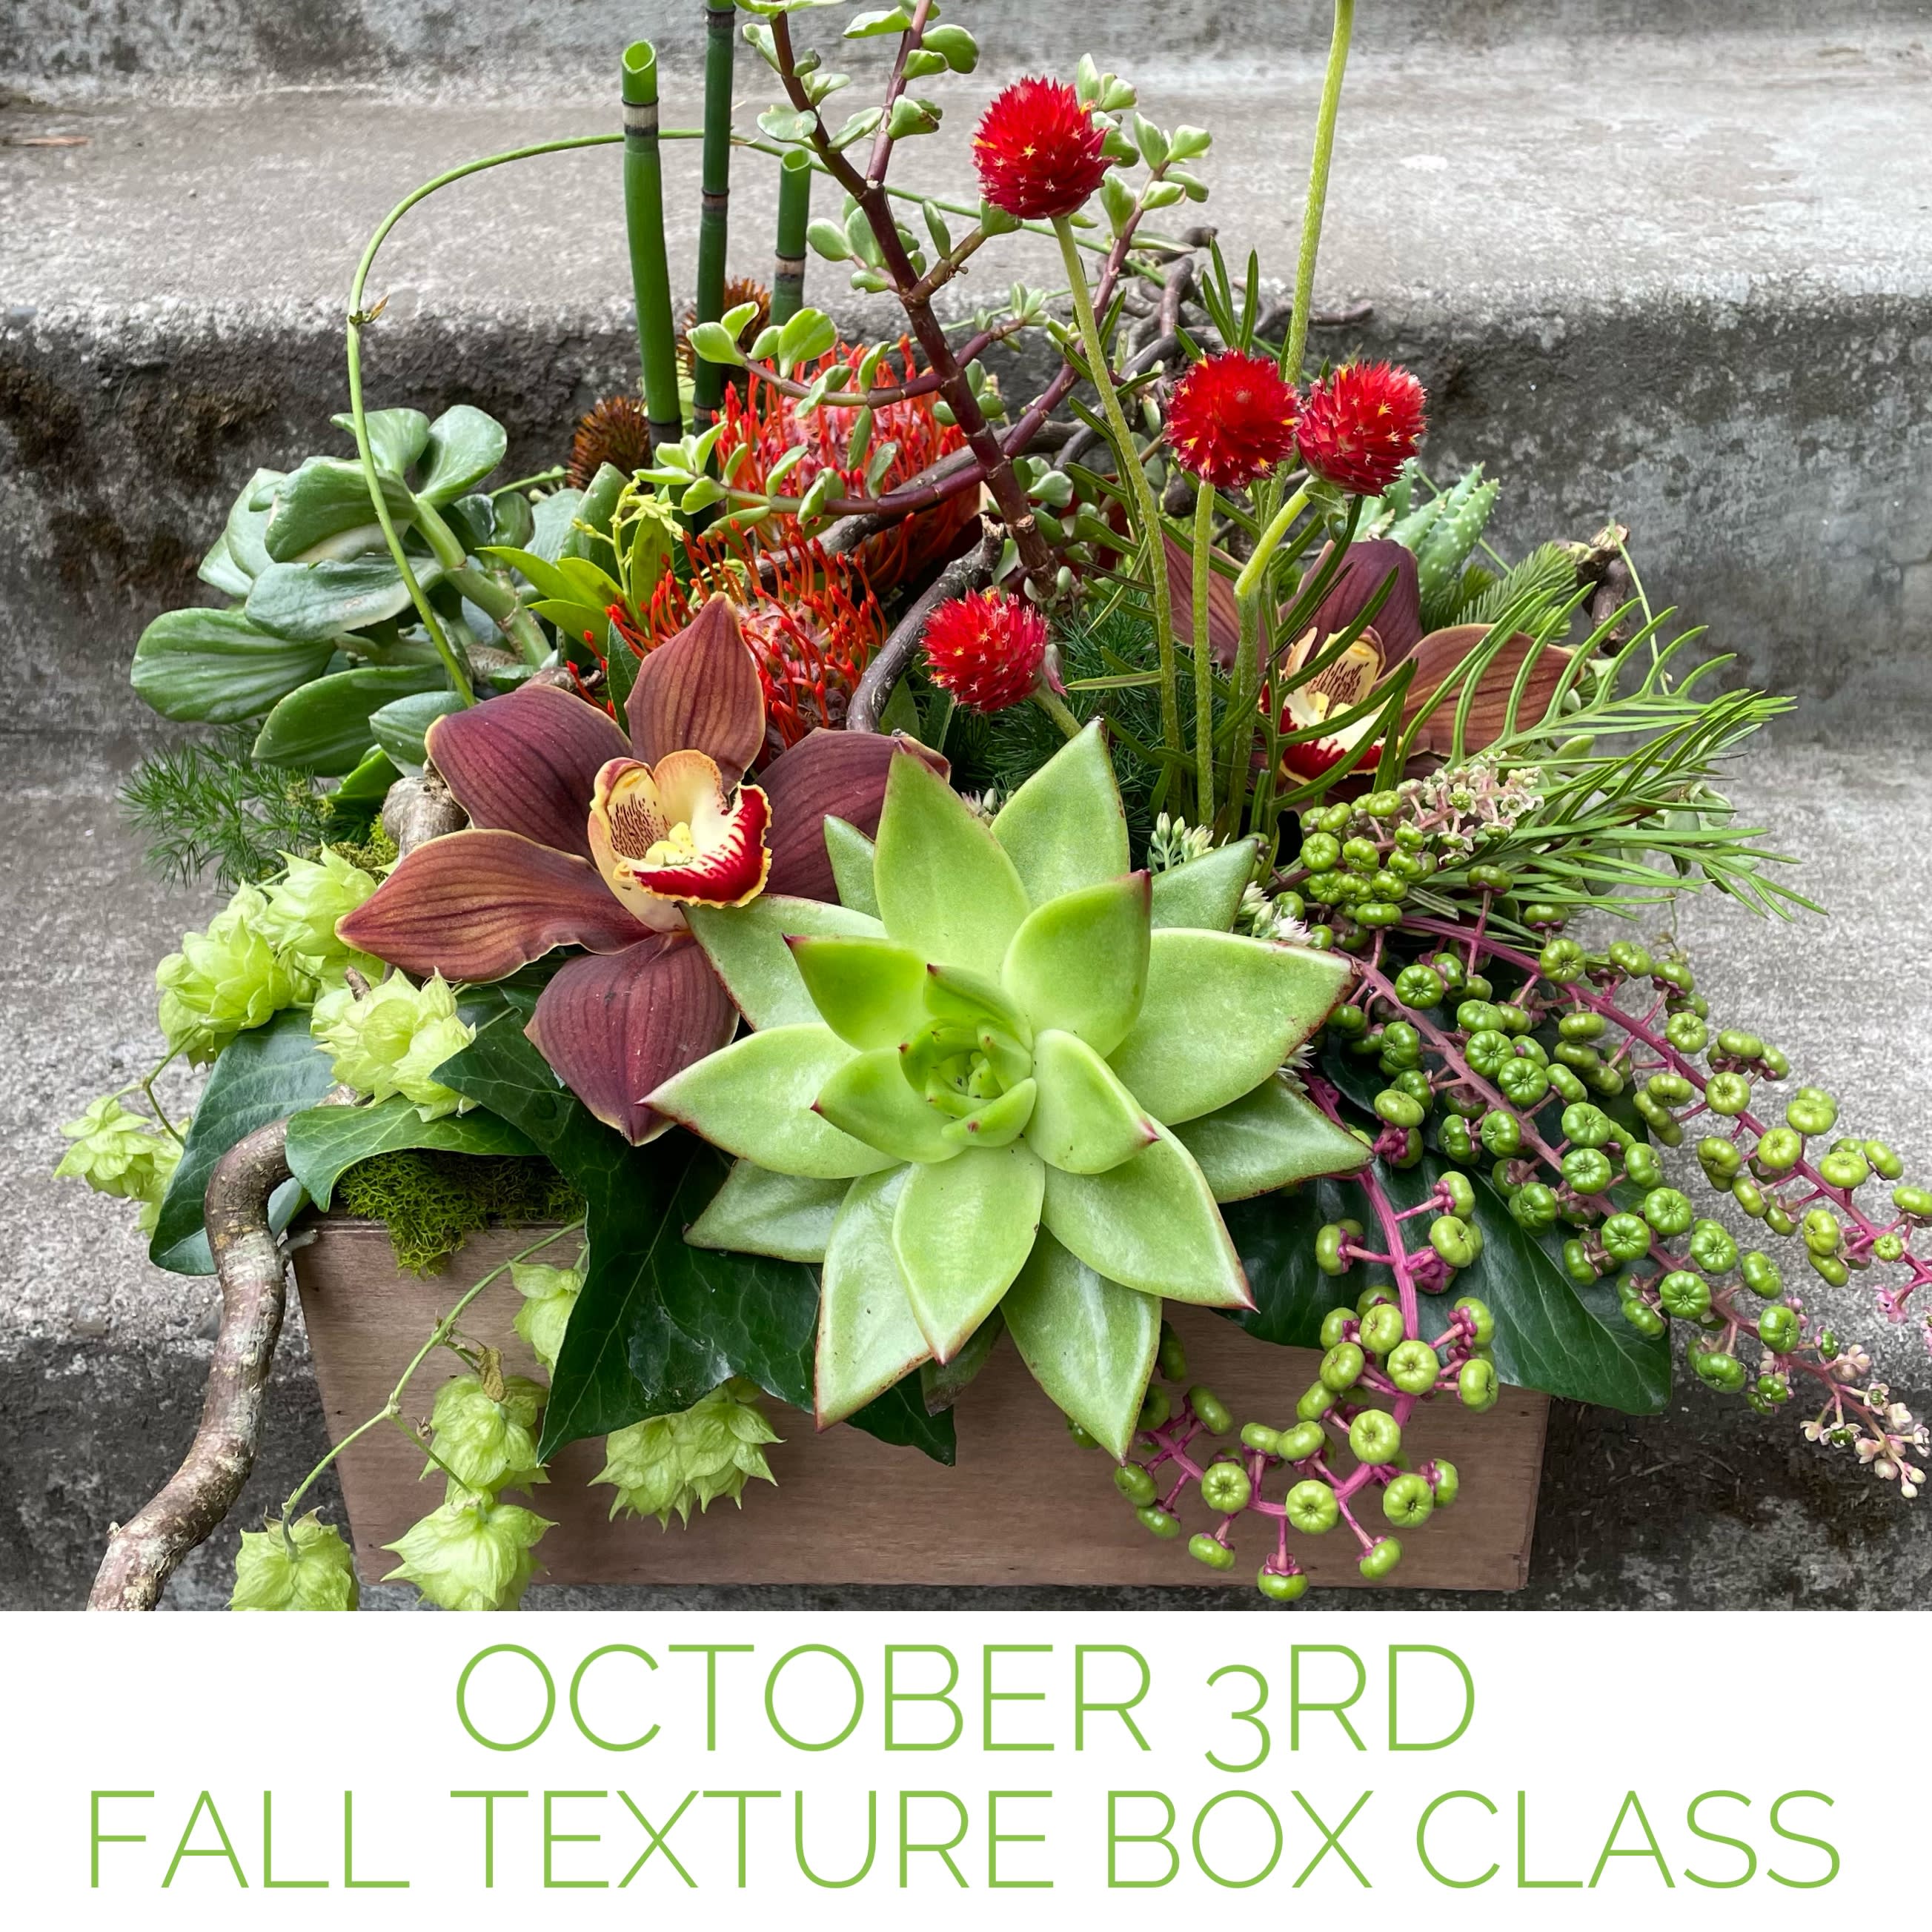 October 3rd, 2024 - Fall Texture Box Class - Our Texture Boxes were an immediate hit when we started offering them in our former boutique inside the Nordstrom Flagship store. When we offered them online, they became an even bigger hit! In fact, they were such a big hit that we now offer texture boxes in four sizes and have added Texture Bowls to create what we call our Texture Collection.  We were constantly asked when we were going to offer a class in how to make them, so we decided to give it a try it. The Texture Box classes have been full ever since. They are scheduled twice a year, once in spring and again in fall, and the boxes in each season have a very different feeling that is attuned to the season.  We supply everything that you need to create a beautiful Texture Box worth $115 that reflects your personal style. We also explain give instruction how to plant the succulents from your Texture Box so that you may continue to enjoy them once the flowers have faded. The box and liner can be reused to create your own designs at home. See our Texture Collection of arrangements by selecting &quot;Shop Online&quot; from the &quot;Shop&quot; dropdown menu.